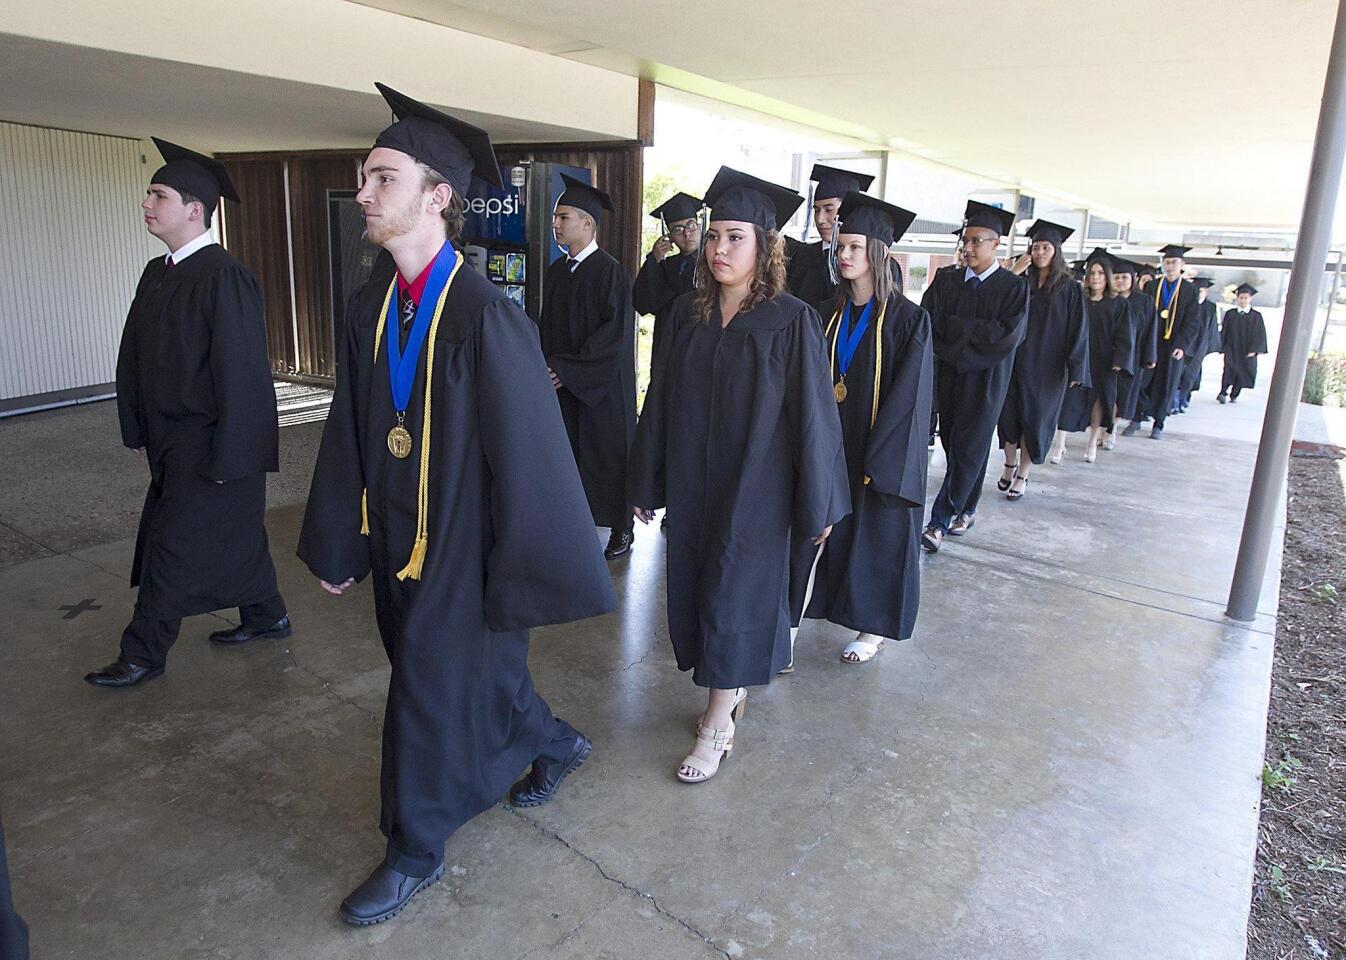 Graduating students walk into the Early College High School’s commencement ceremony Thursday.